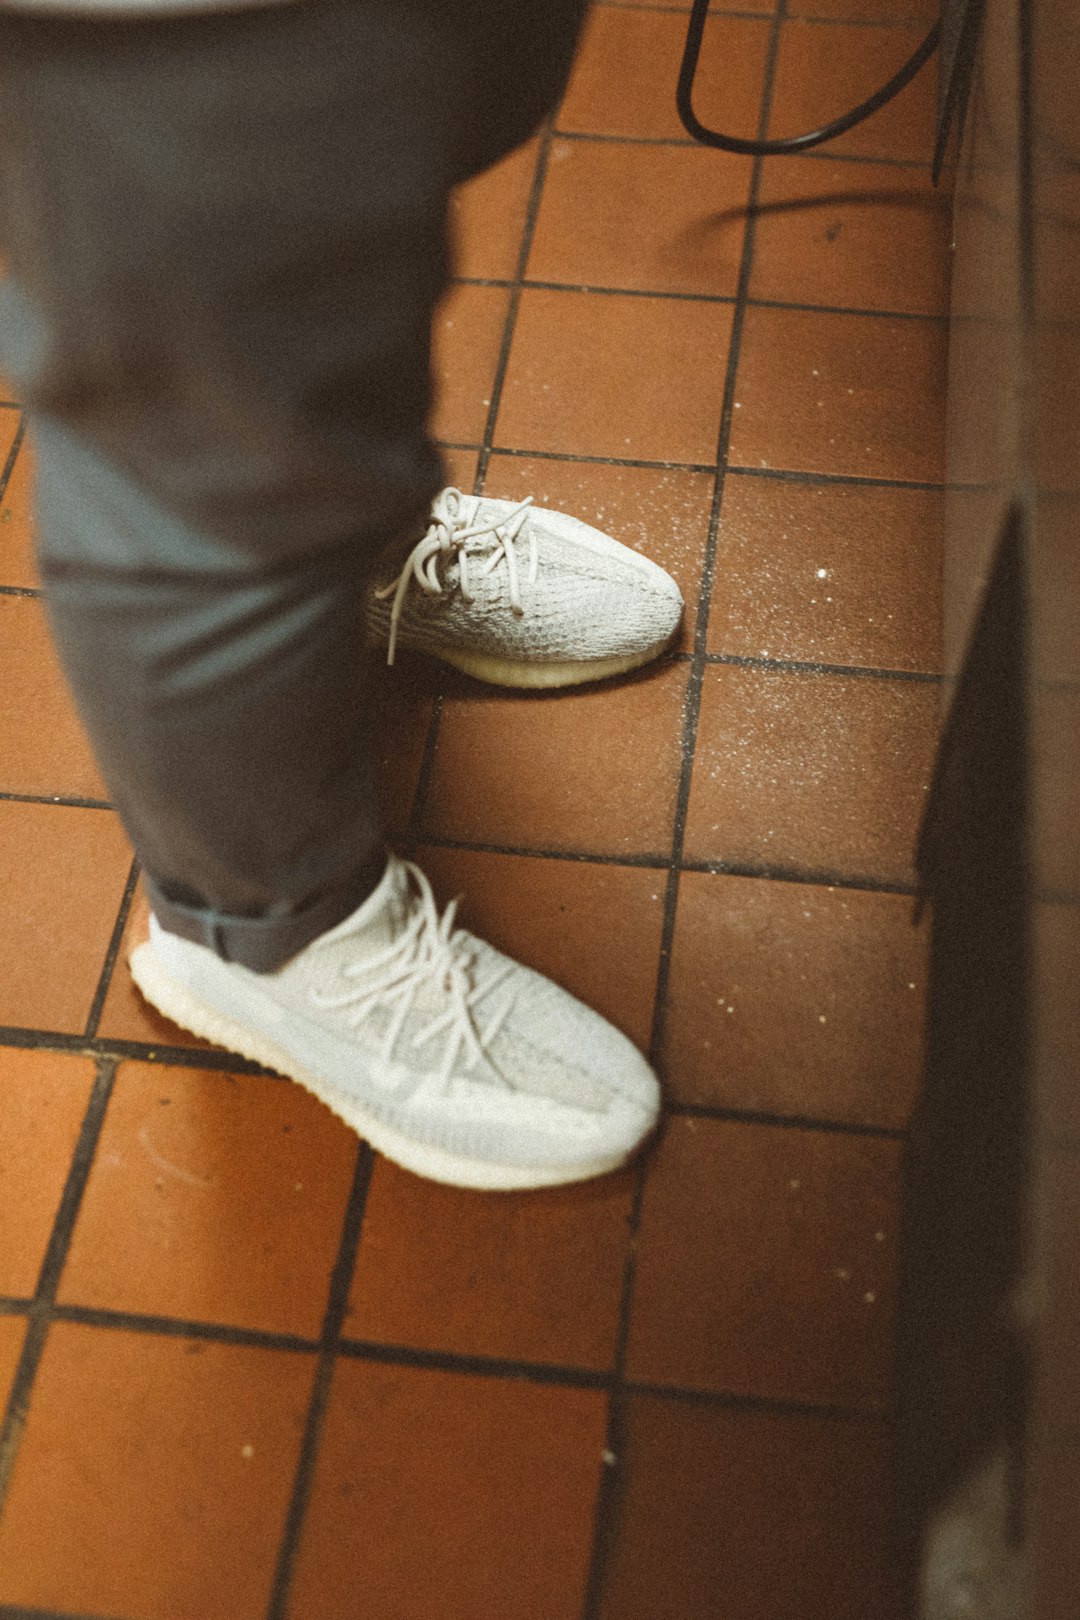 person wearing white running shoes